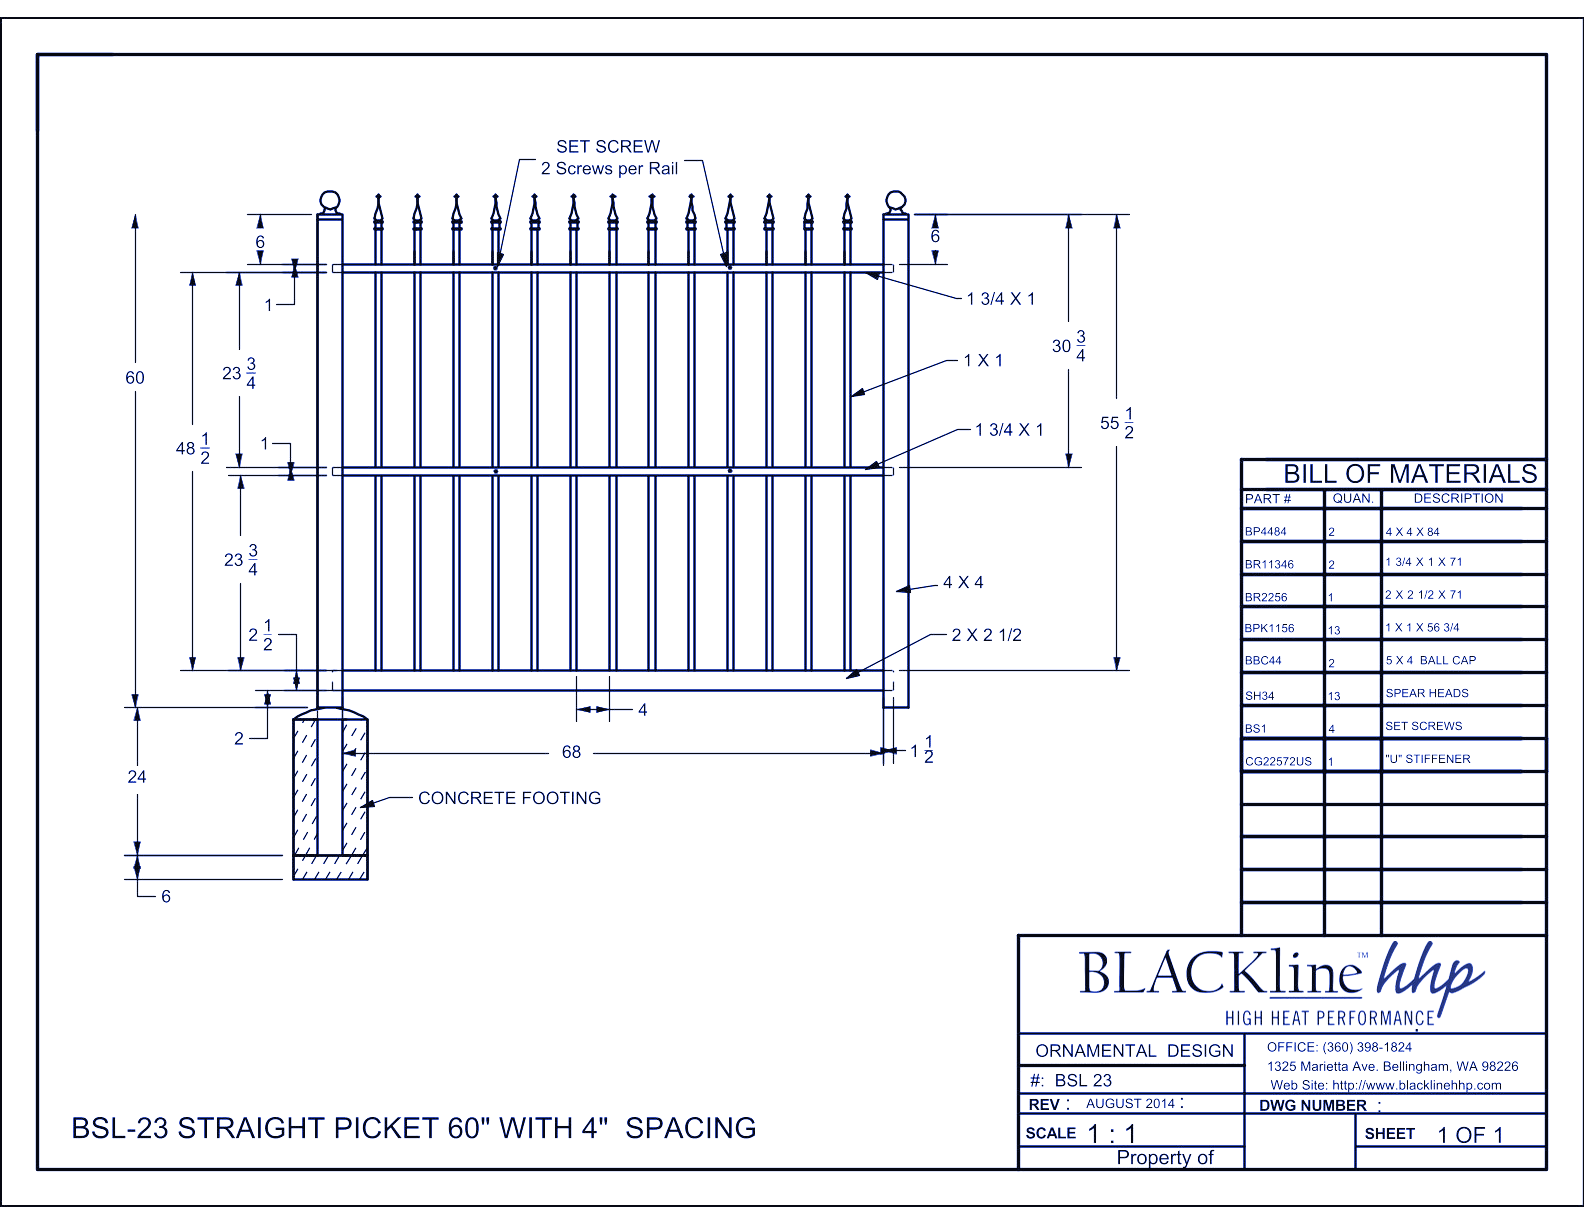 BSL-23: Straight Picket 60" with 4" Spacing